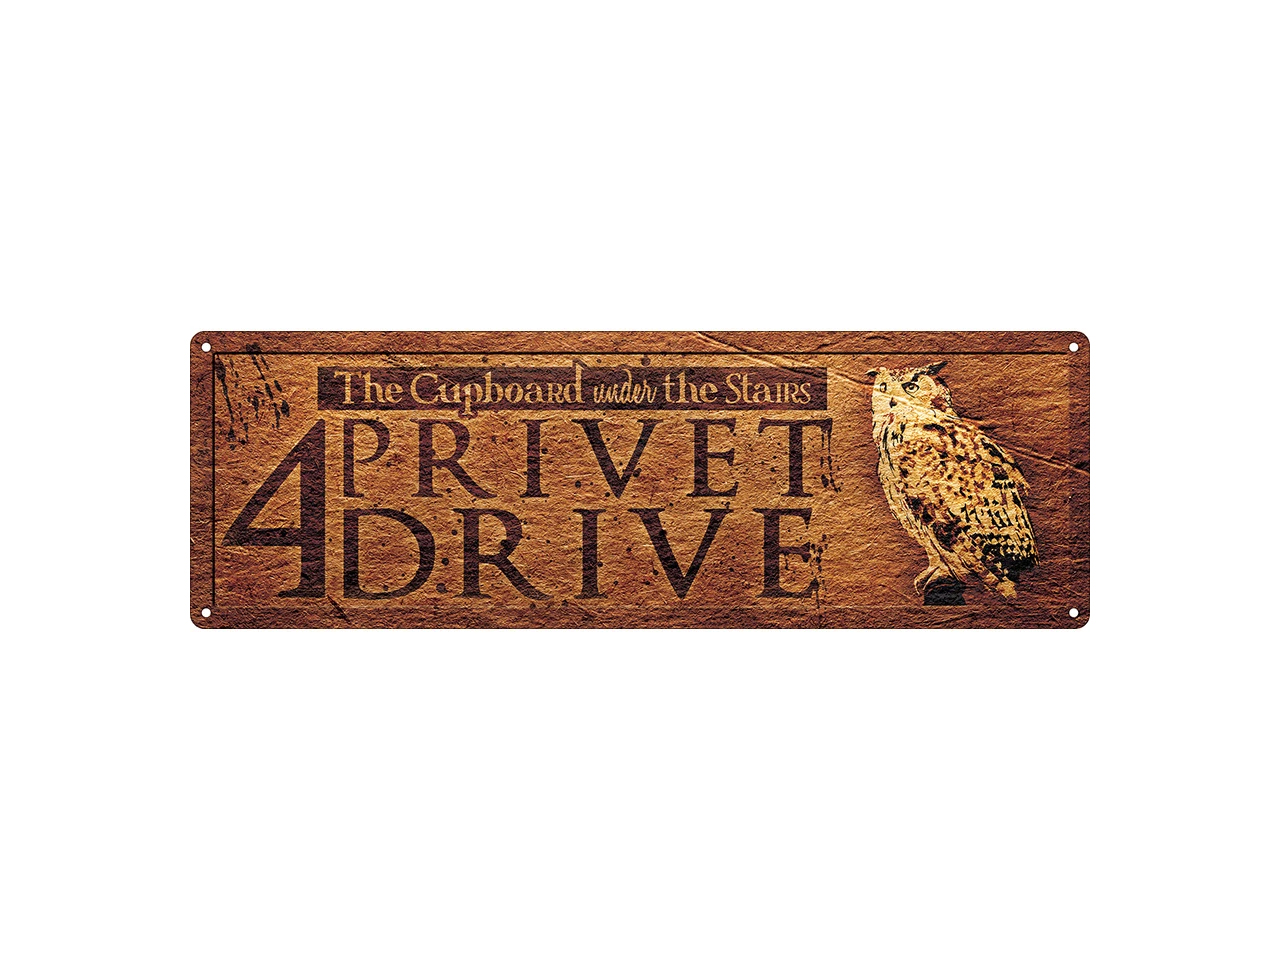 Slim Tin Sign Grindstore Wall Piece Iconic Movie Film Show Harry Potter 4 Privet Drive